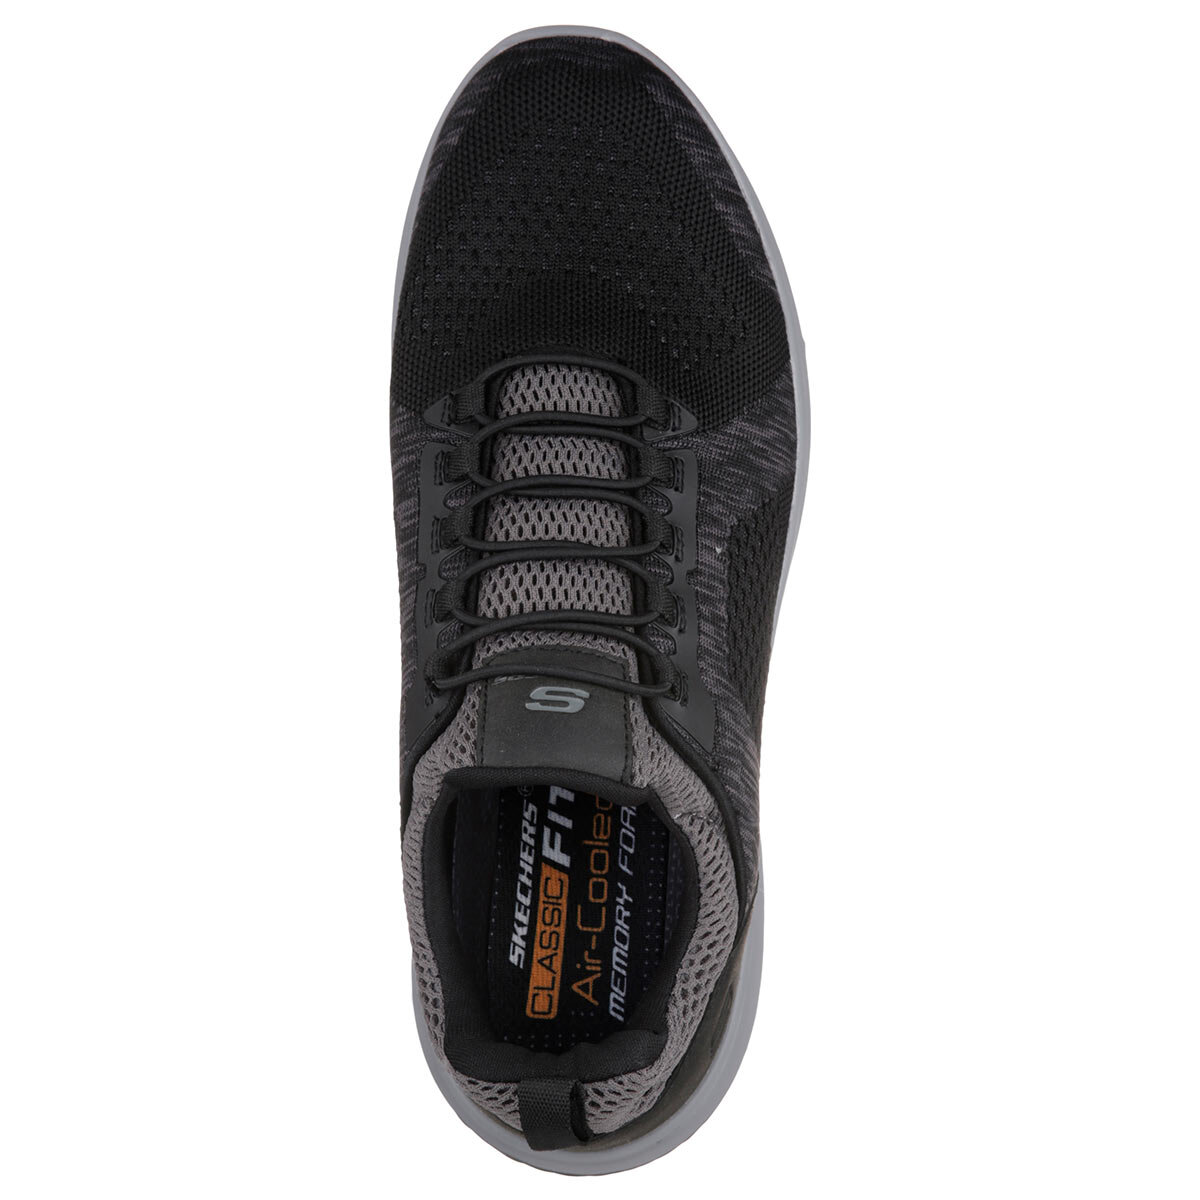 Skechers Delson-Brewton Men's Shoes in Charcoal